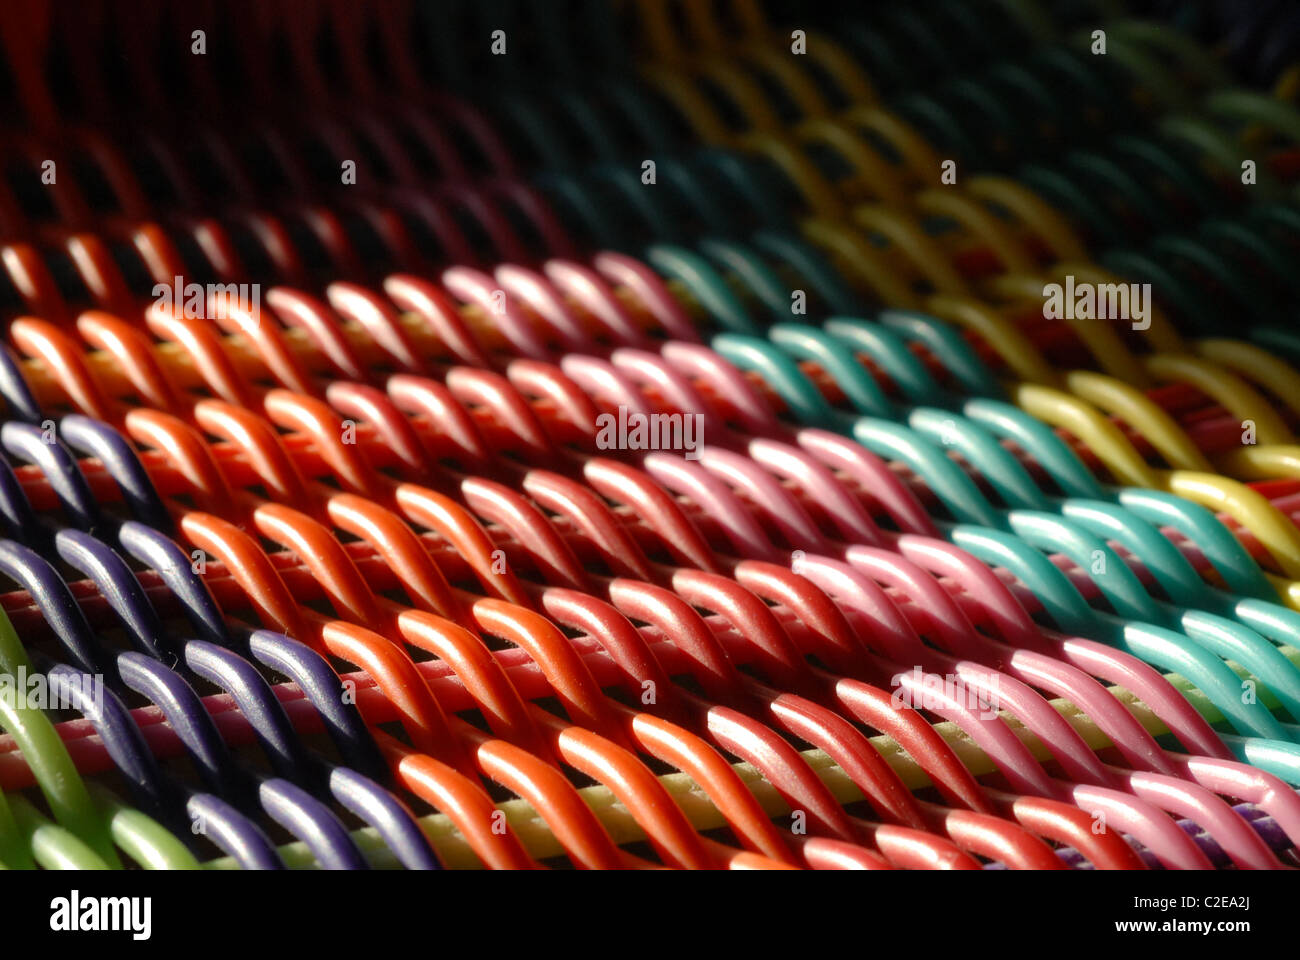 Colorful woven chair seat. Stock Photo